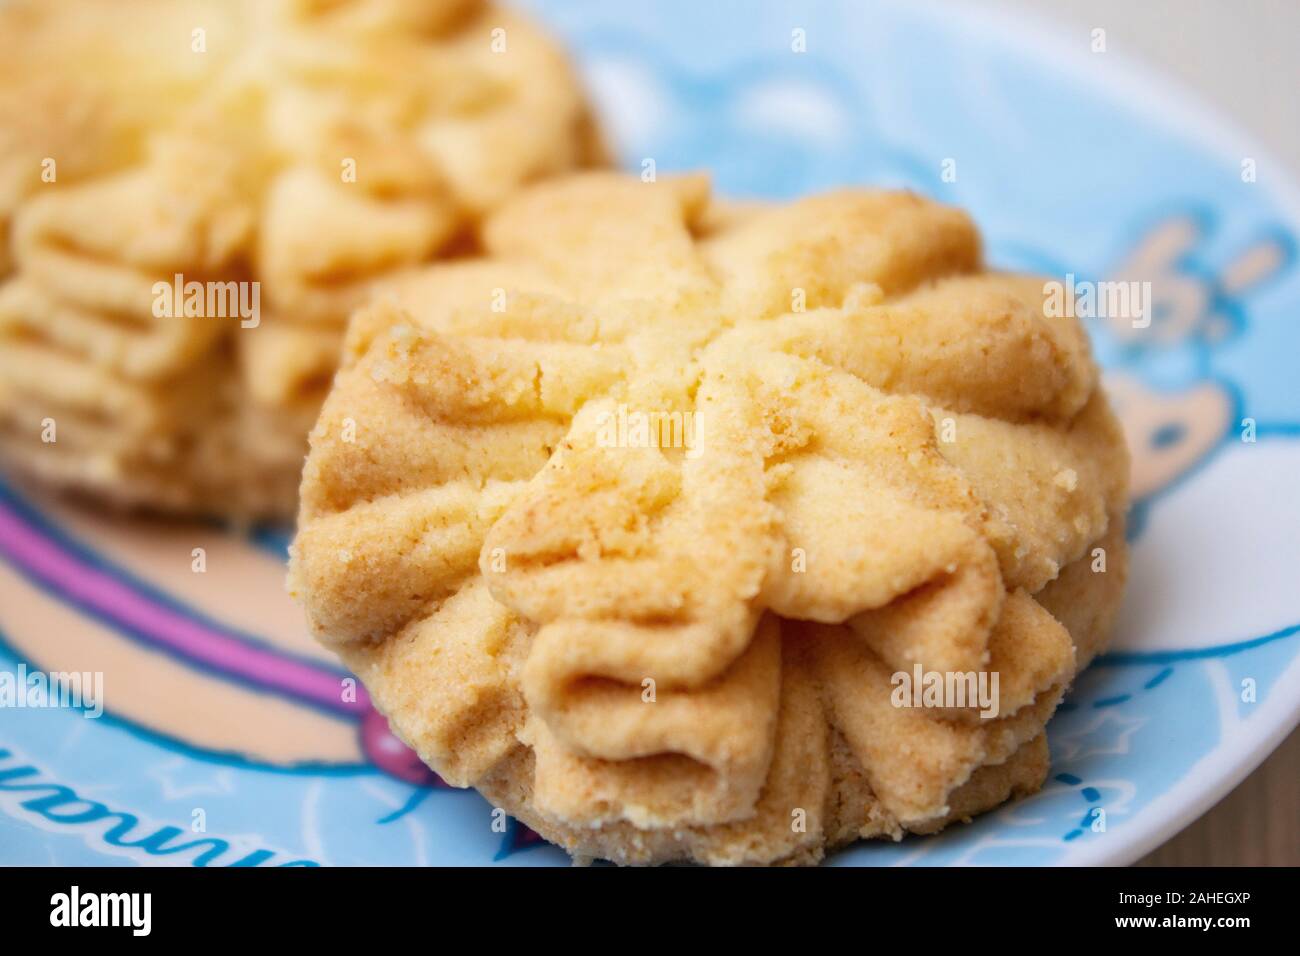 Homemade butter Cookie with a flower shape Stock Photo